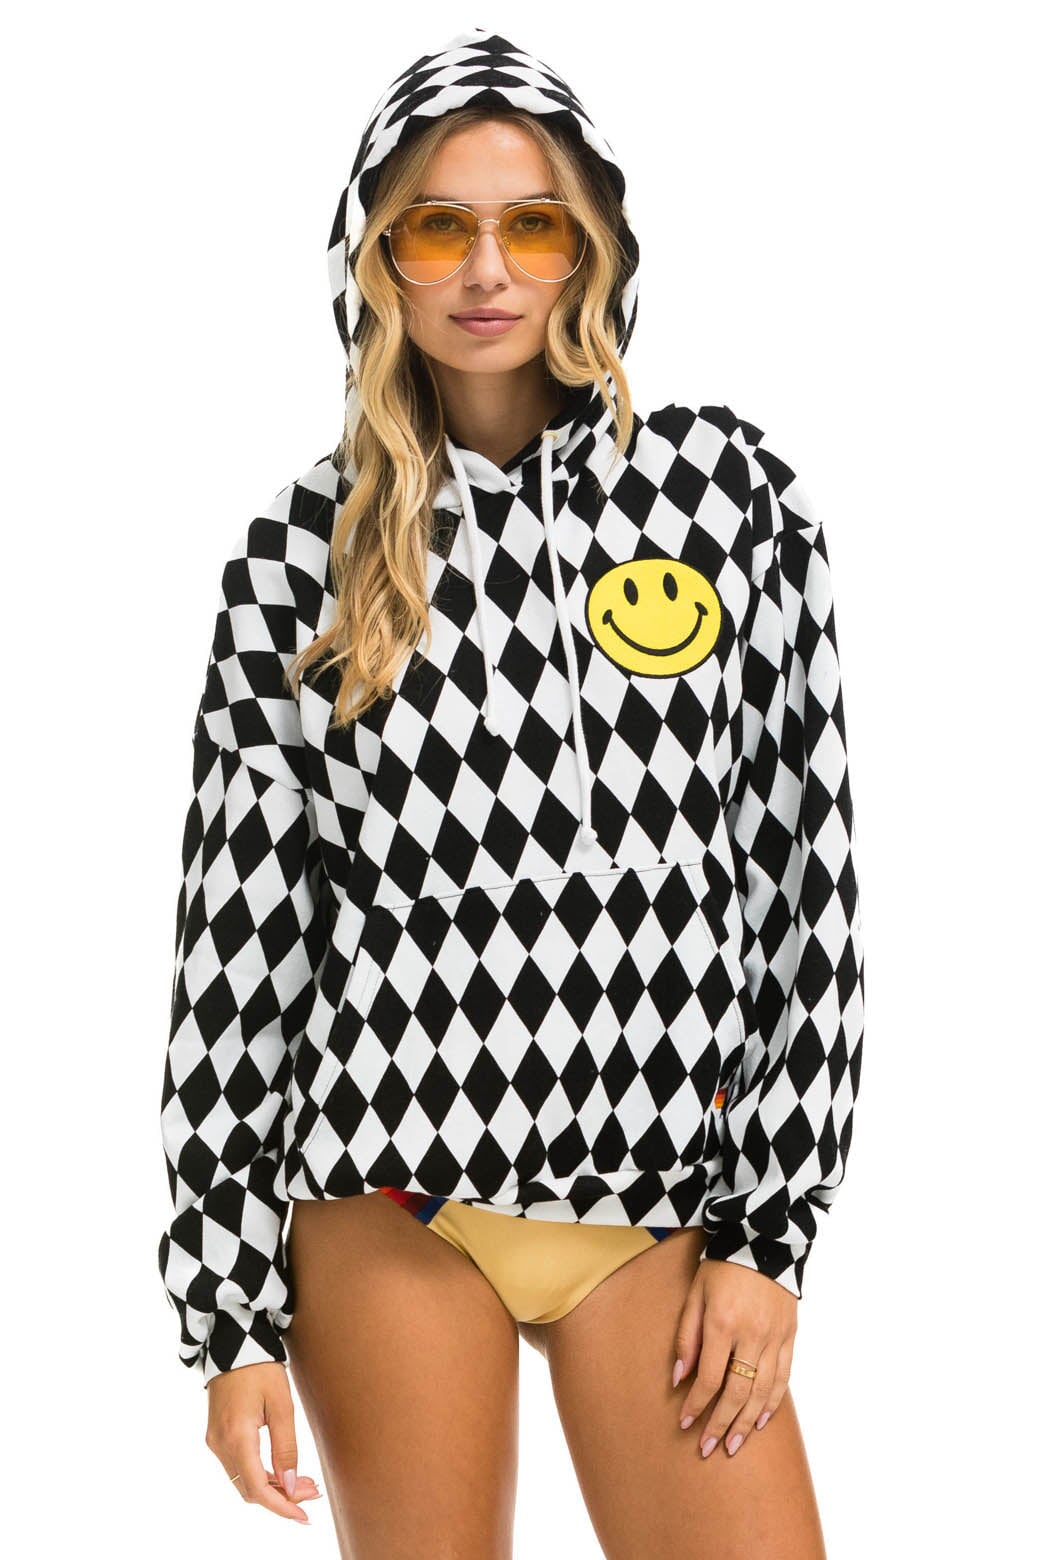 DIAMOND SMILEY 2 EMBRIODERY RELAXED PULLOVER HOODIE - WHITE // BLACK Hoodie Aviator Nation 